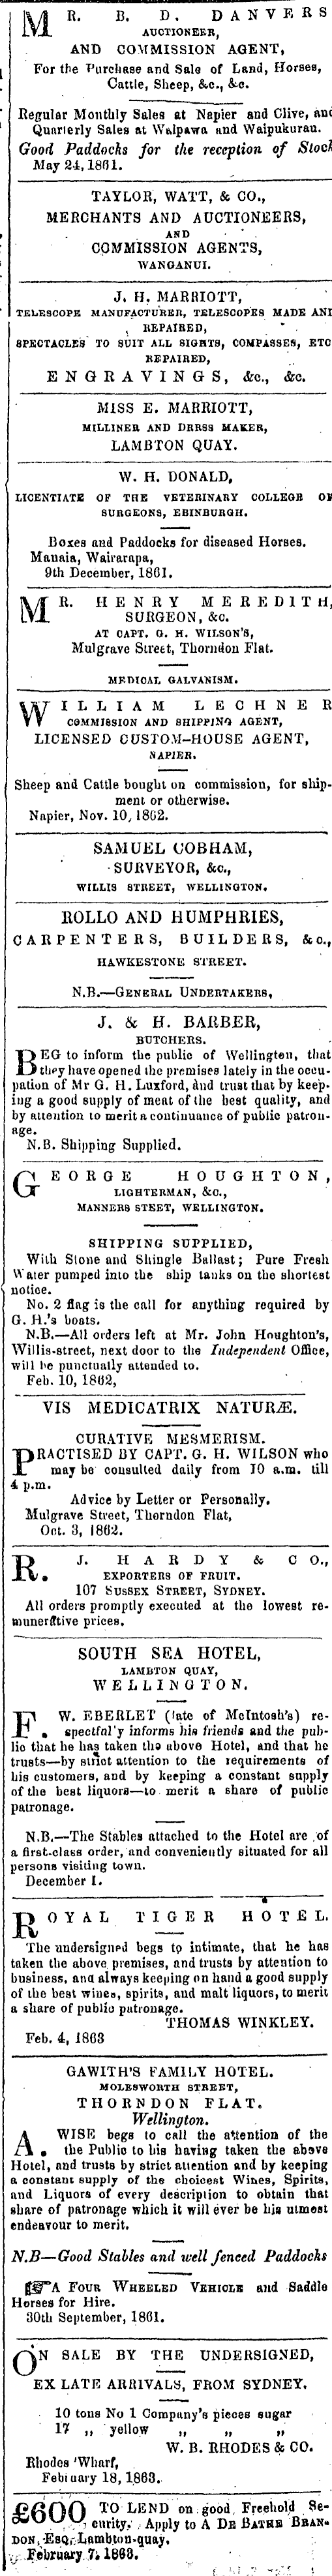 Papers Past | Newspapers | Wellington Independent | 14 March 1863 | Page 1  Advertisements Column 3